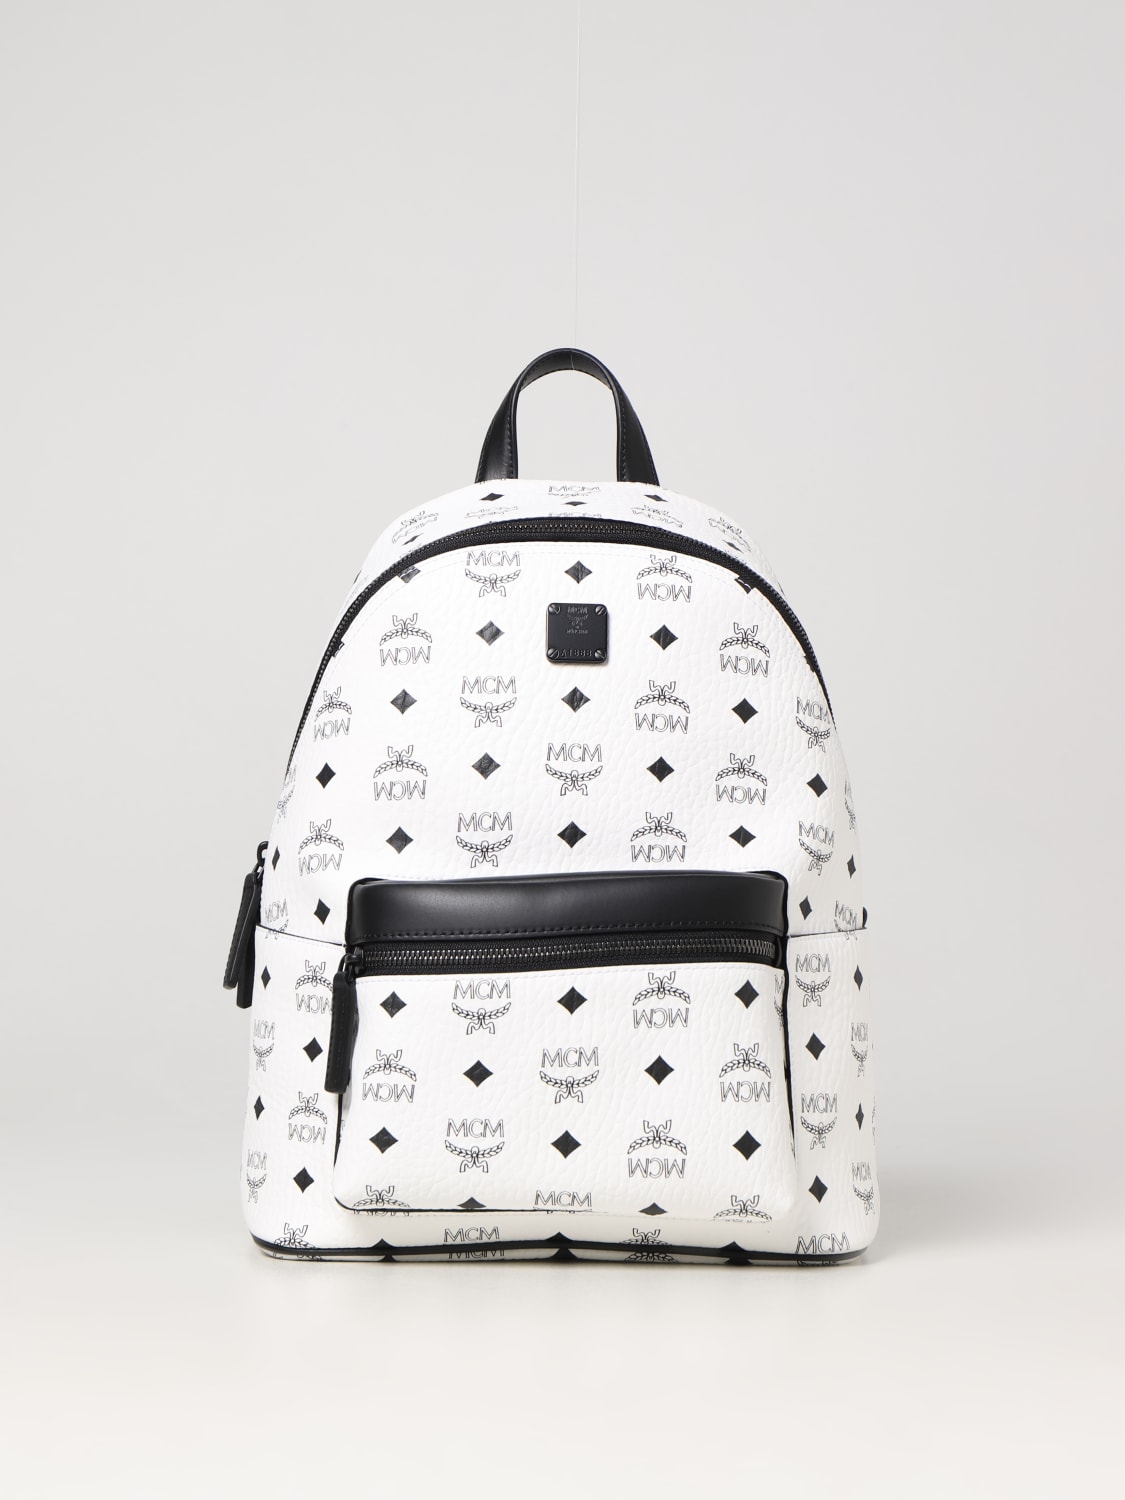 RED MCM BACKPACK BLACK SILVER BACKPACK WHICH ONE YOU GOING WITH